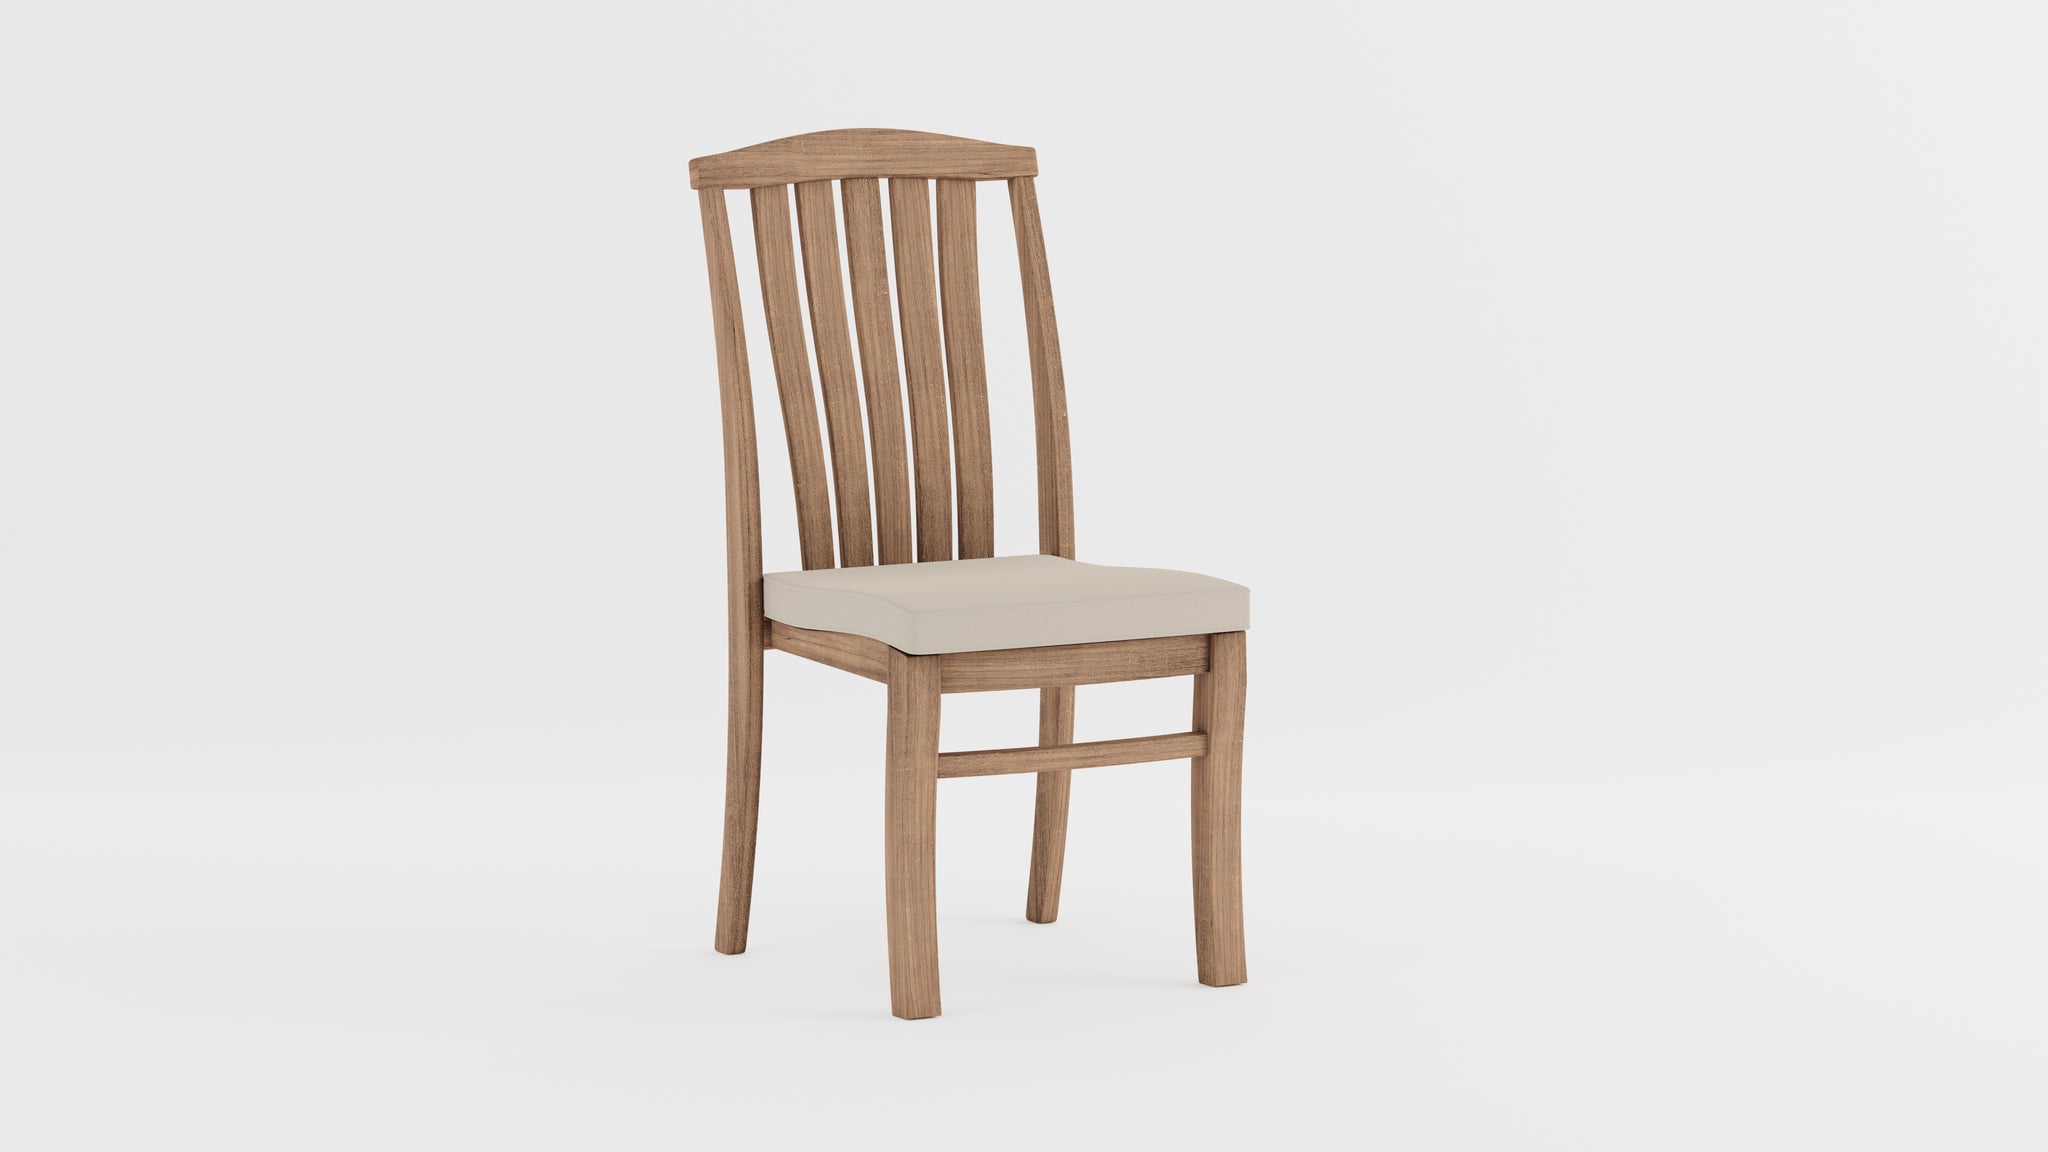 Dorchester Teak Stacking Dining Chair with Ecru Cushion